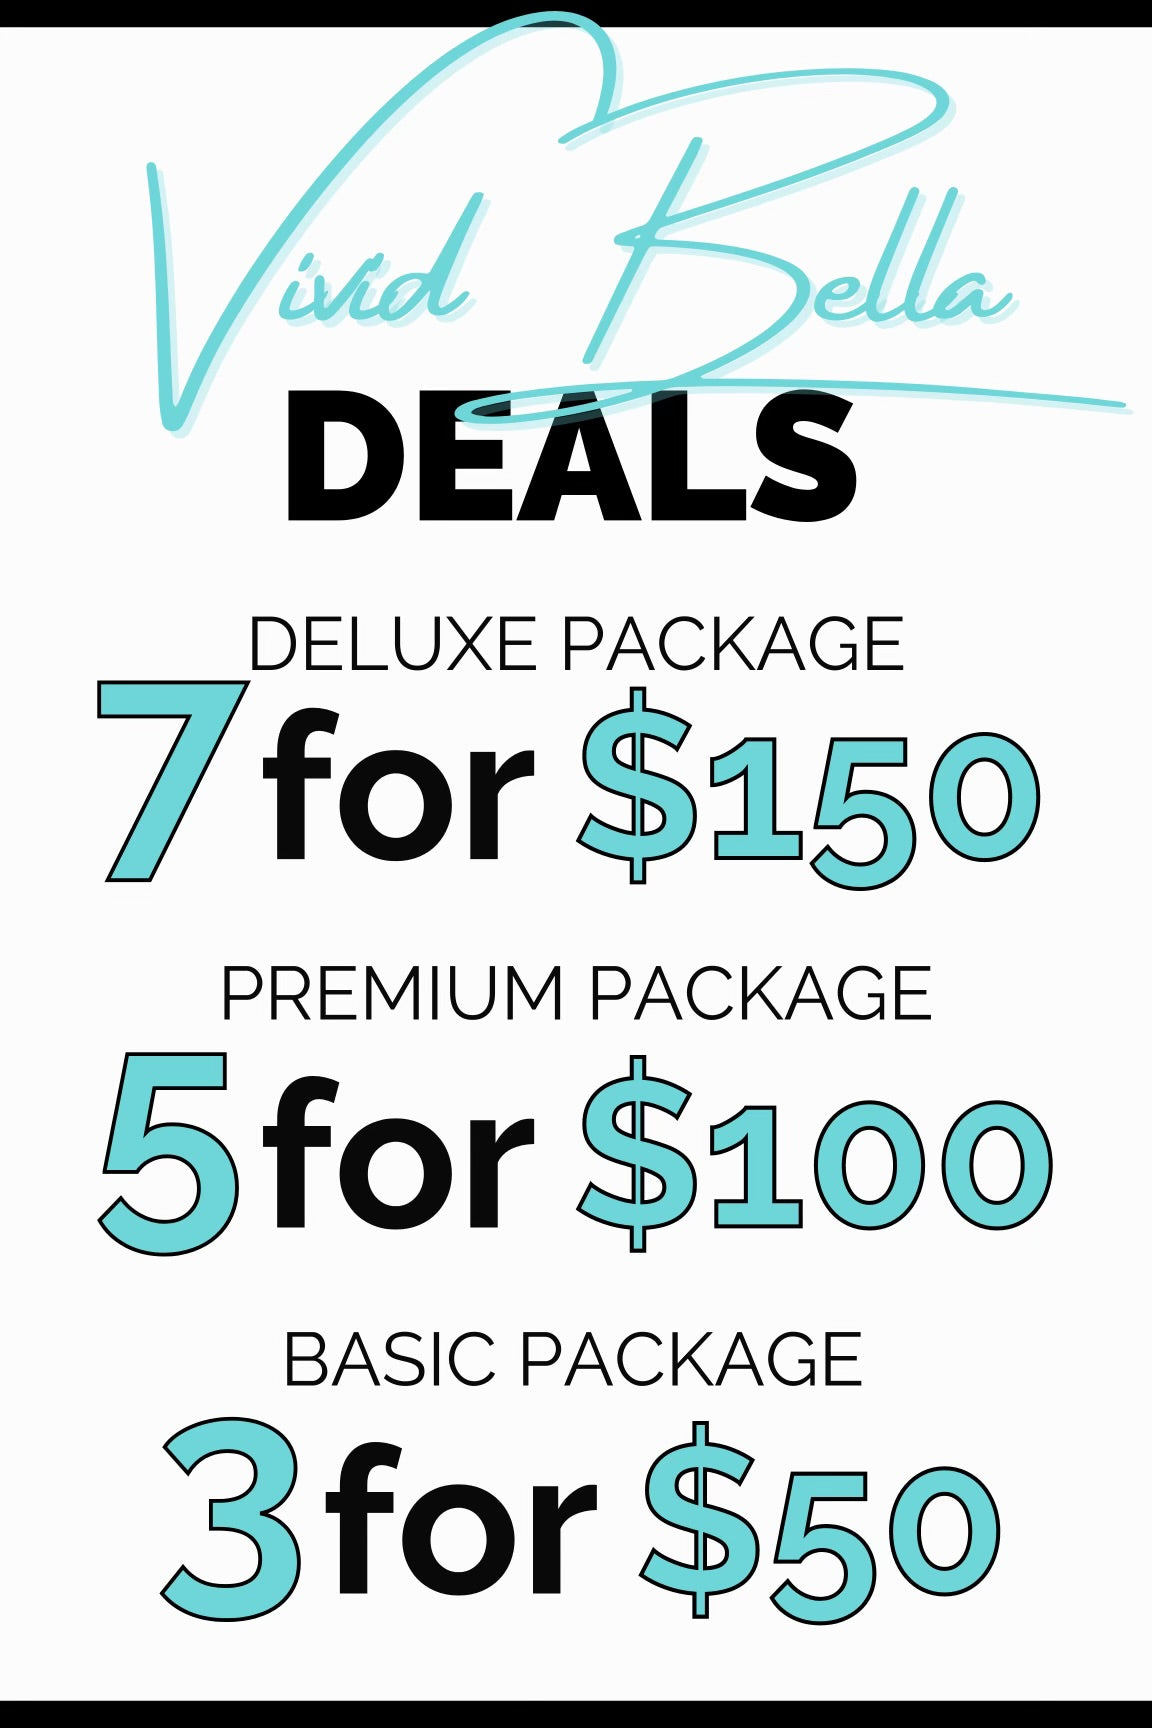 Basic Package (3 For $50)